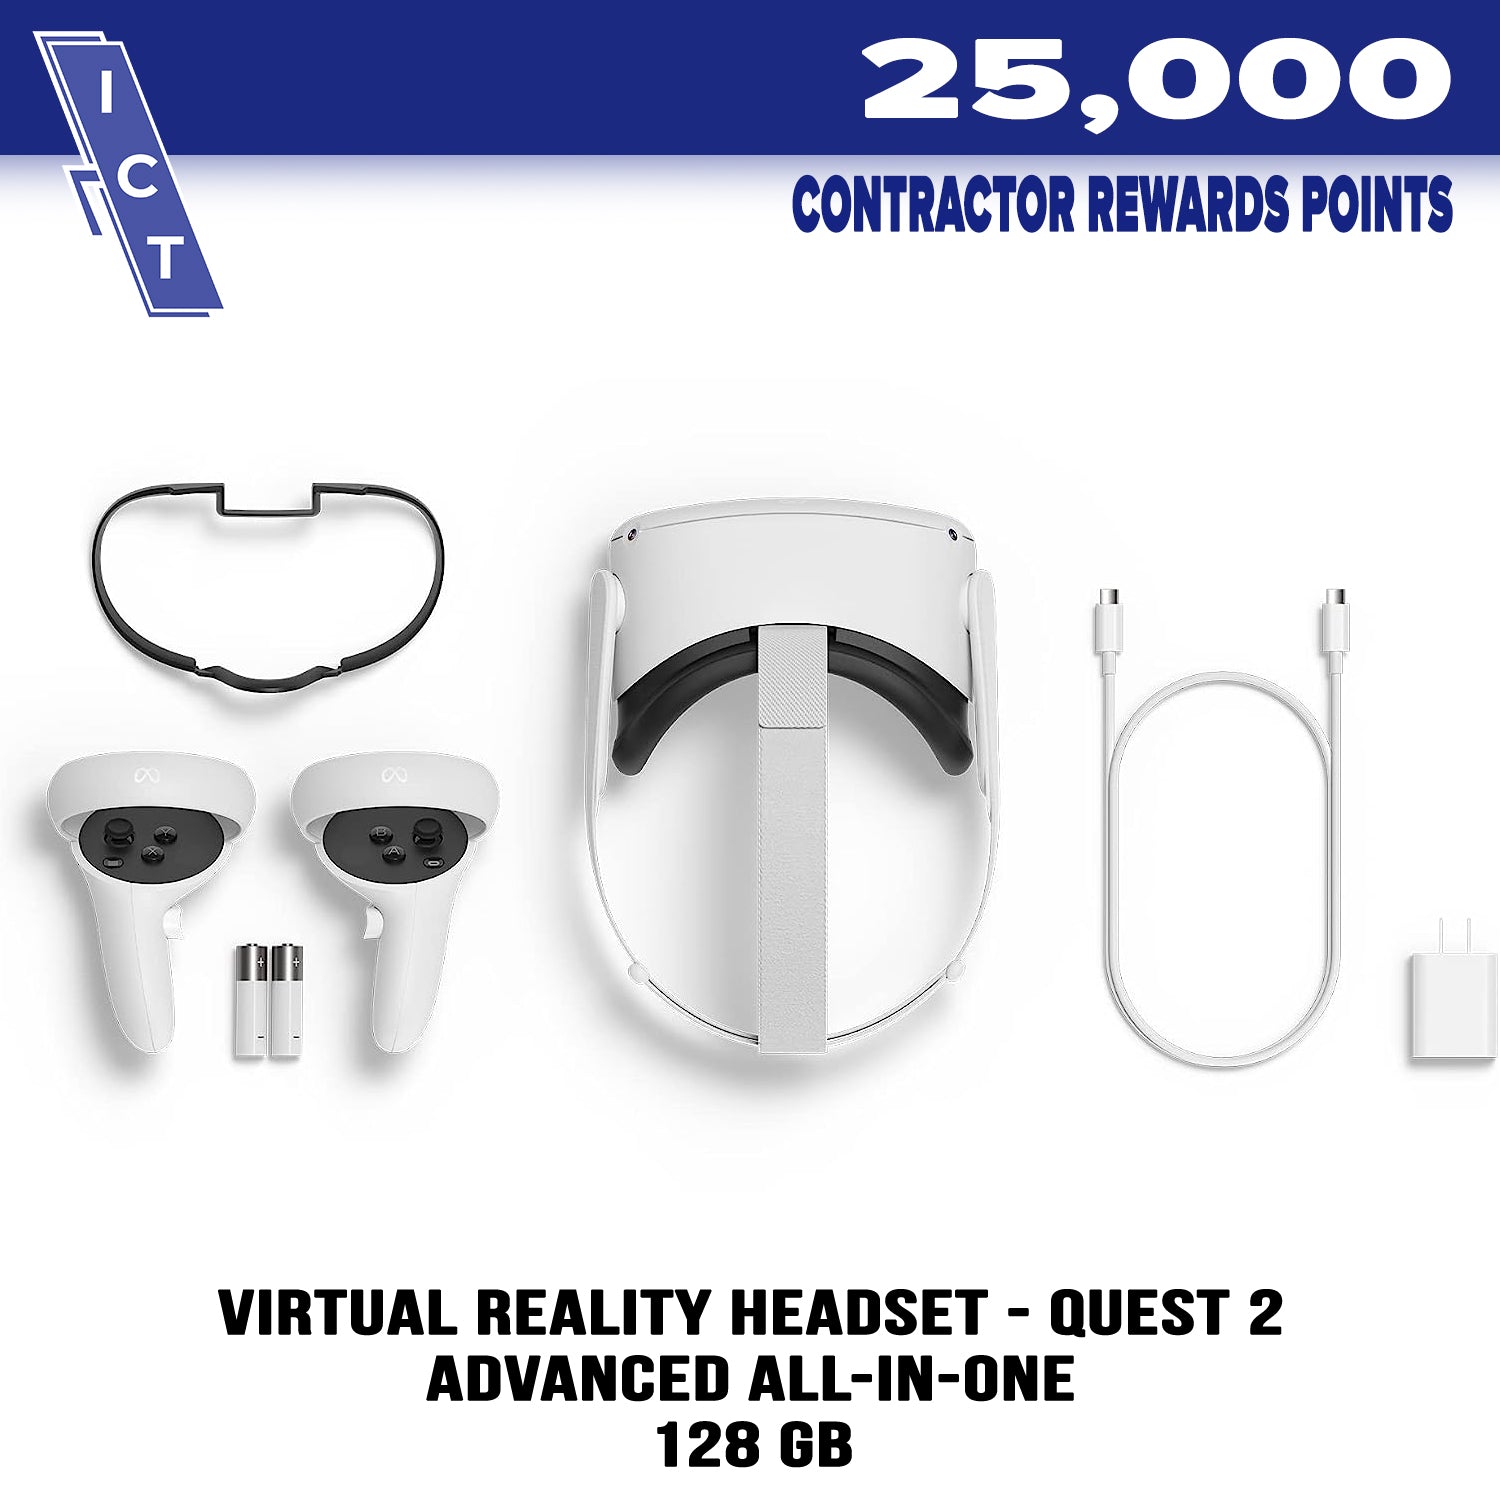 Quest 2 VR headset prize for 25000 points